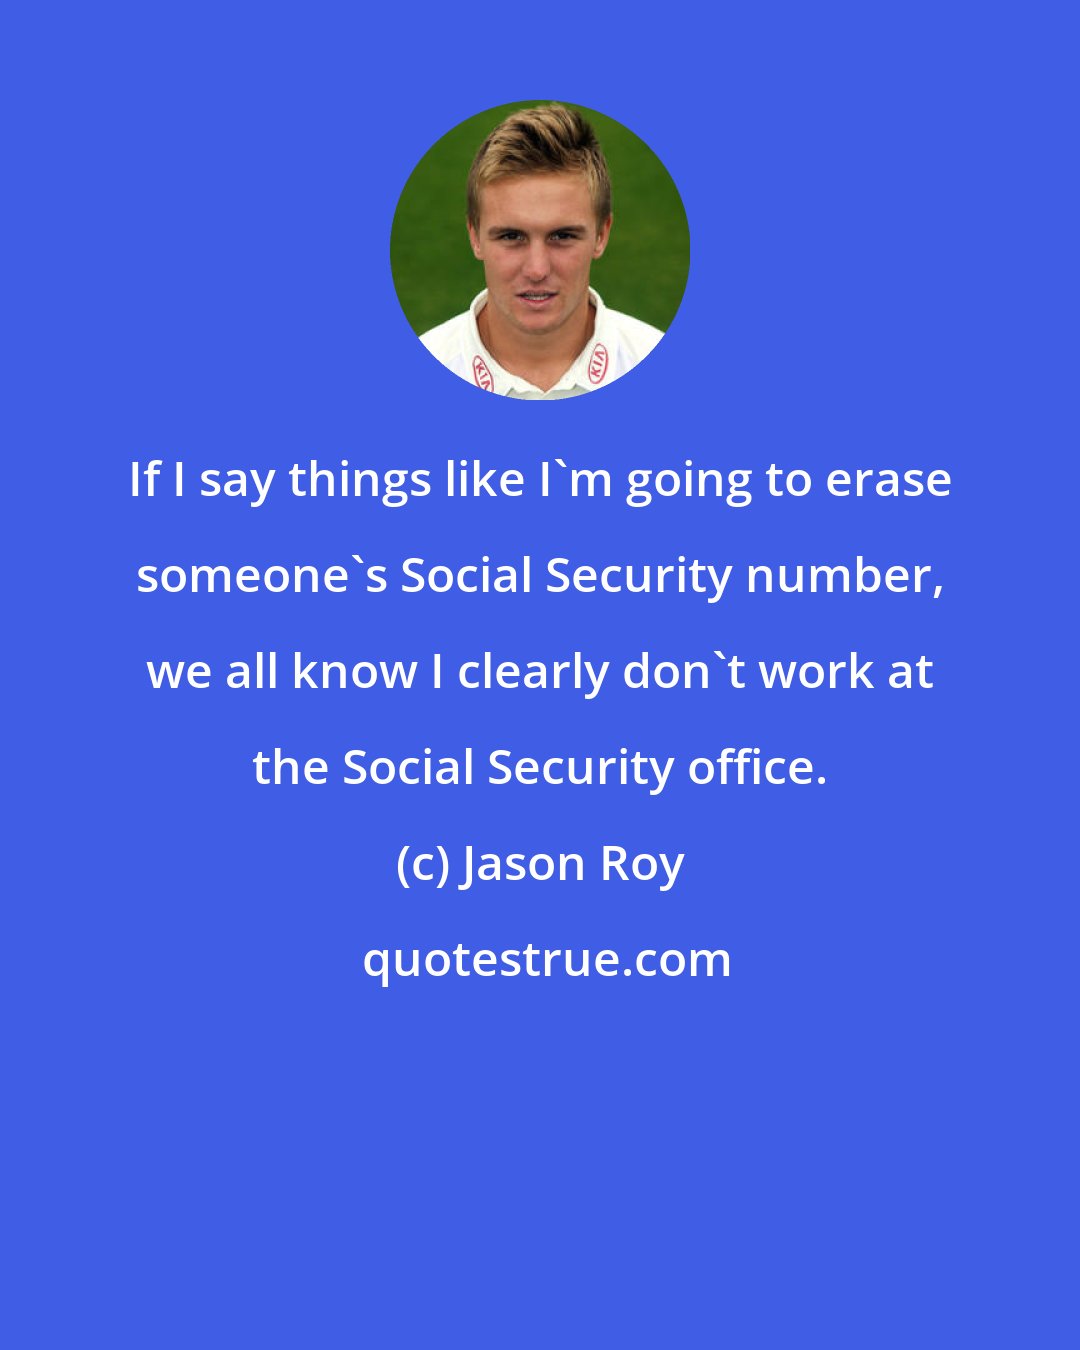 Jason Roy: If I say things like I'm going to erase someone's Social Security number, we all know I clearly don't work at the Social Security office.